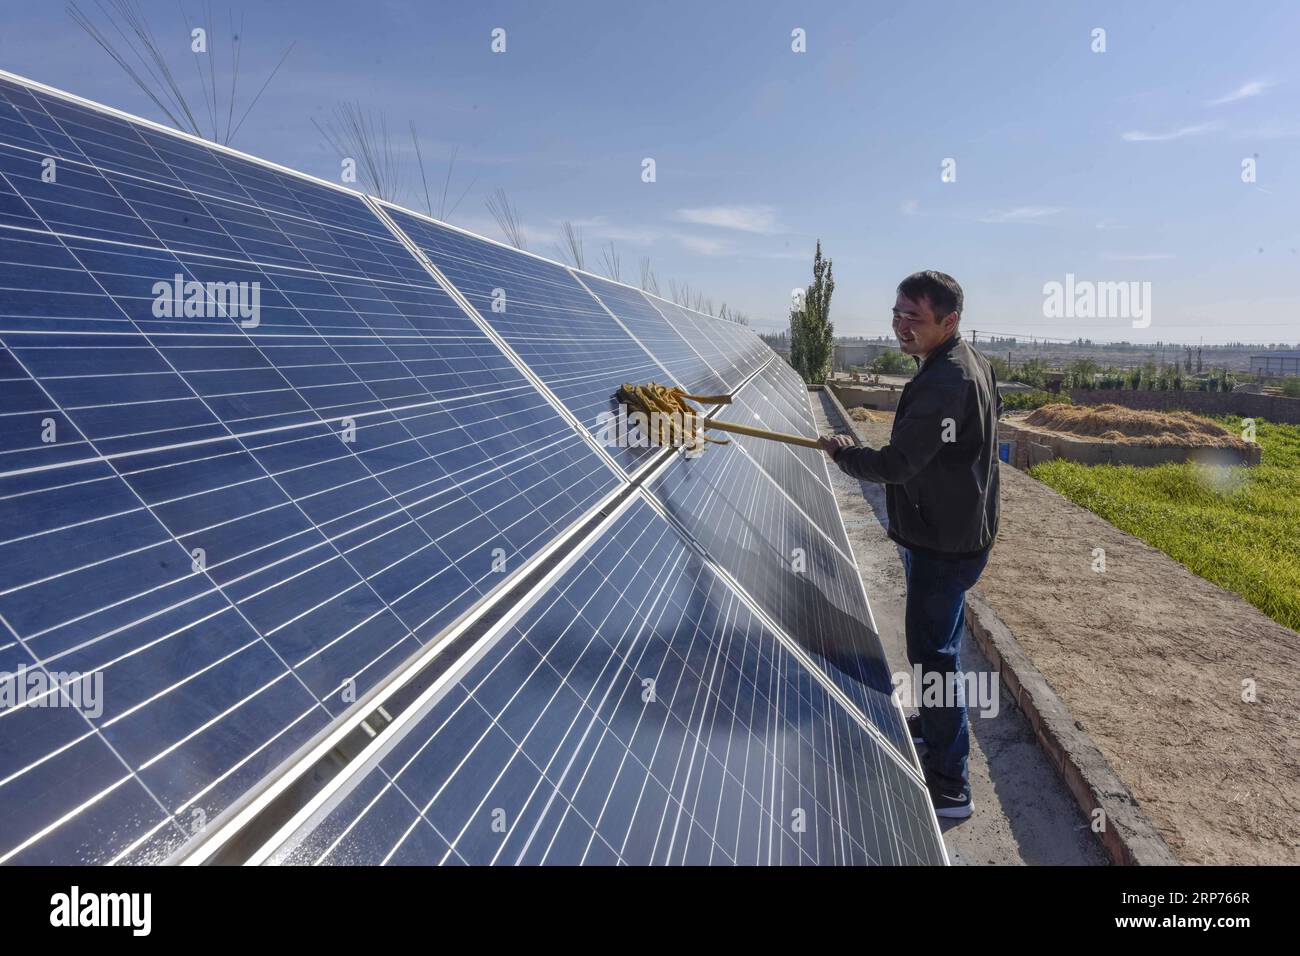 (190129) -- BEIJING, Jan. 29, 2019 (Xinhua) -- Villager Pan Linqi cleans solar panels in Hami, northwest China s Xinjiang Uygur Autonomous Region, Sept. 21, 2018. New energy power generation saw double digit growth last year in northwest China s Xinjiang Uygur Autonomous Region amid efforts to reduce coal consumption to improve the energy mix. Wind and solar power generation rose 15.2 percent and 13.6 percent to 36 billion kwh and 11.7 billion kwh respectively, according to the regional development and reform commission. It said 22.9 percent of installed wind power generating capacity and 15.5 Stock Photo